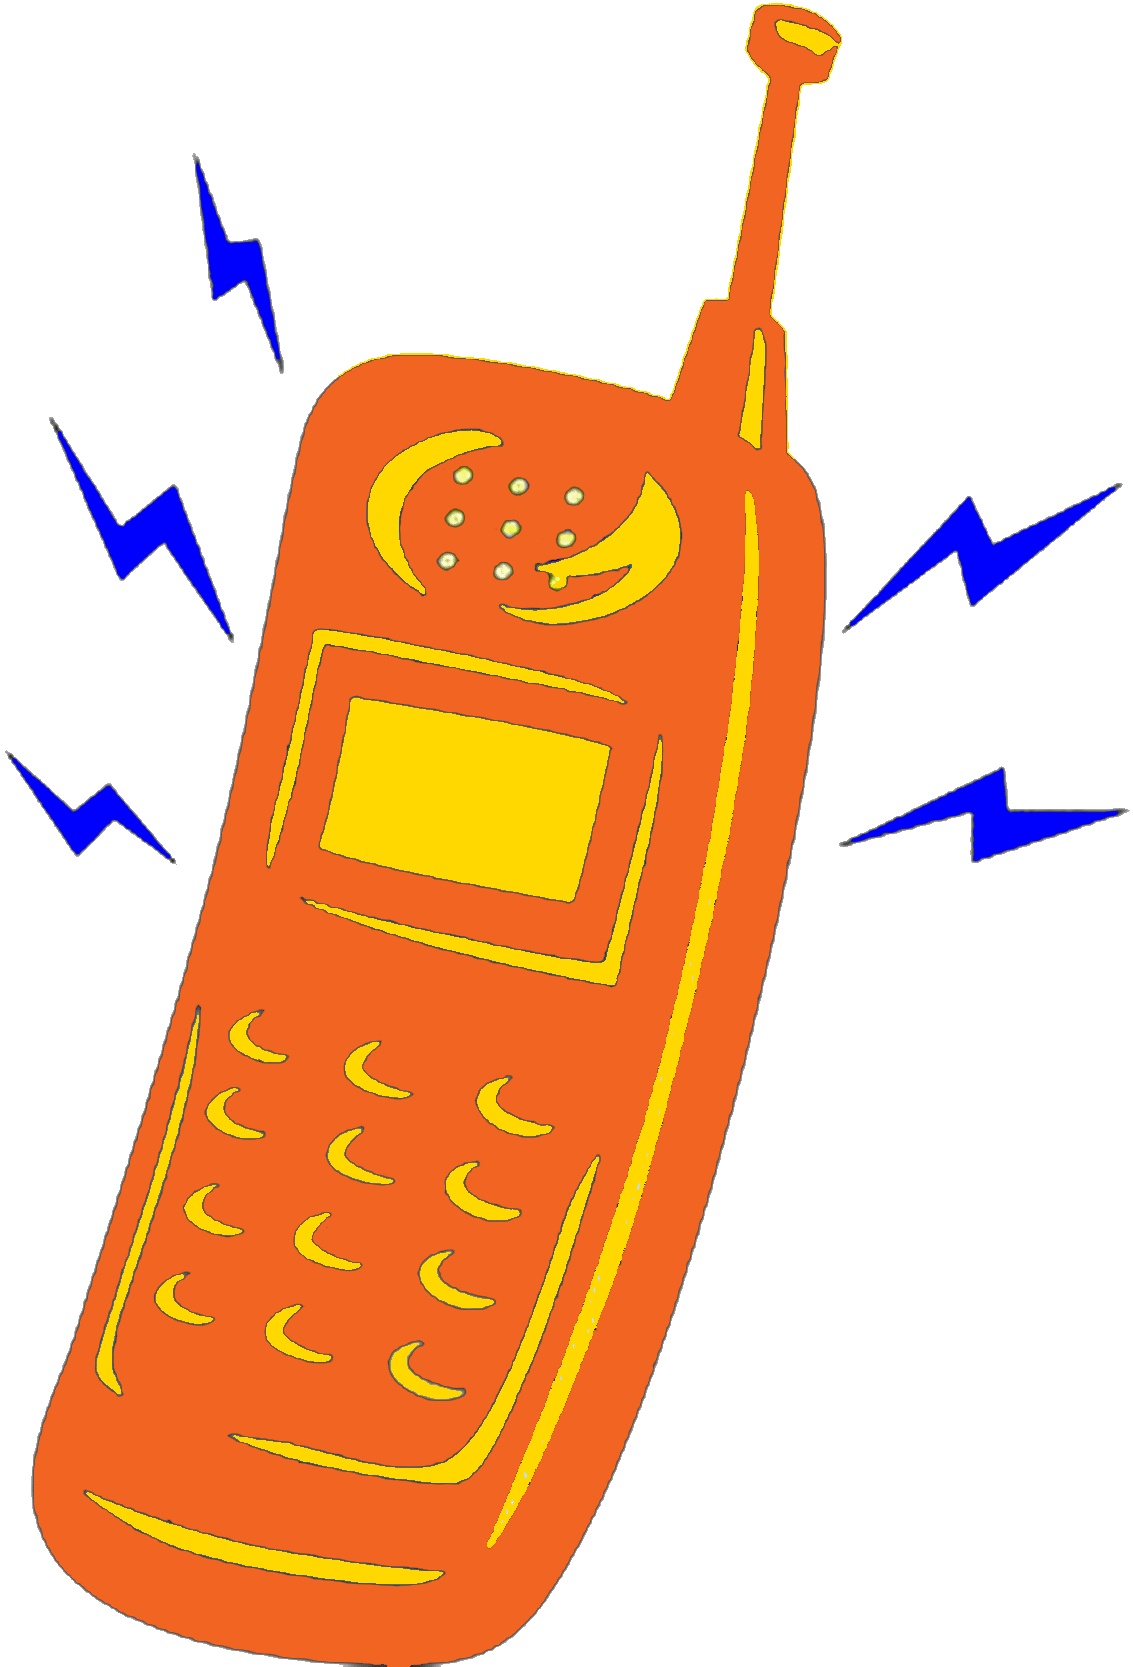 Cell Phone Ringing Clipart.